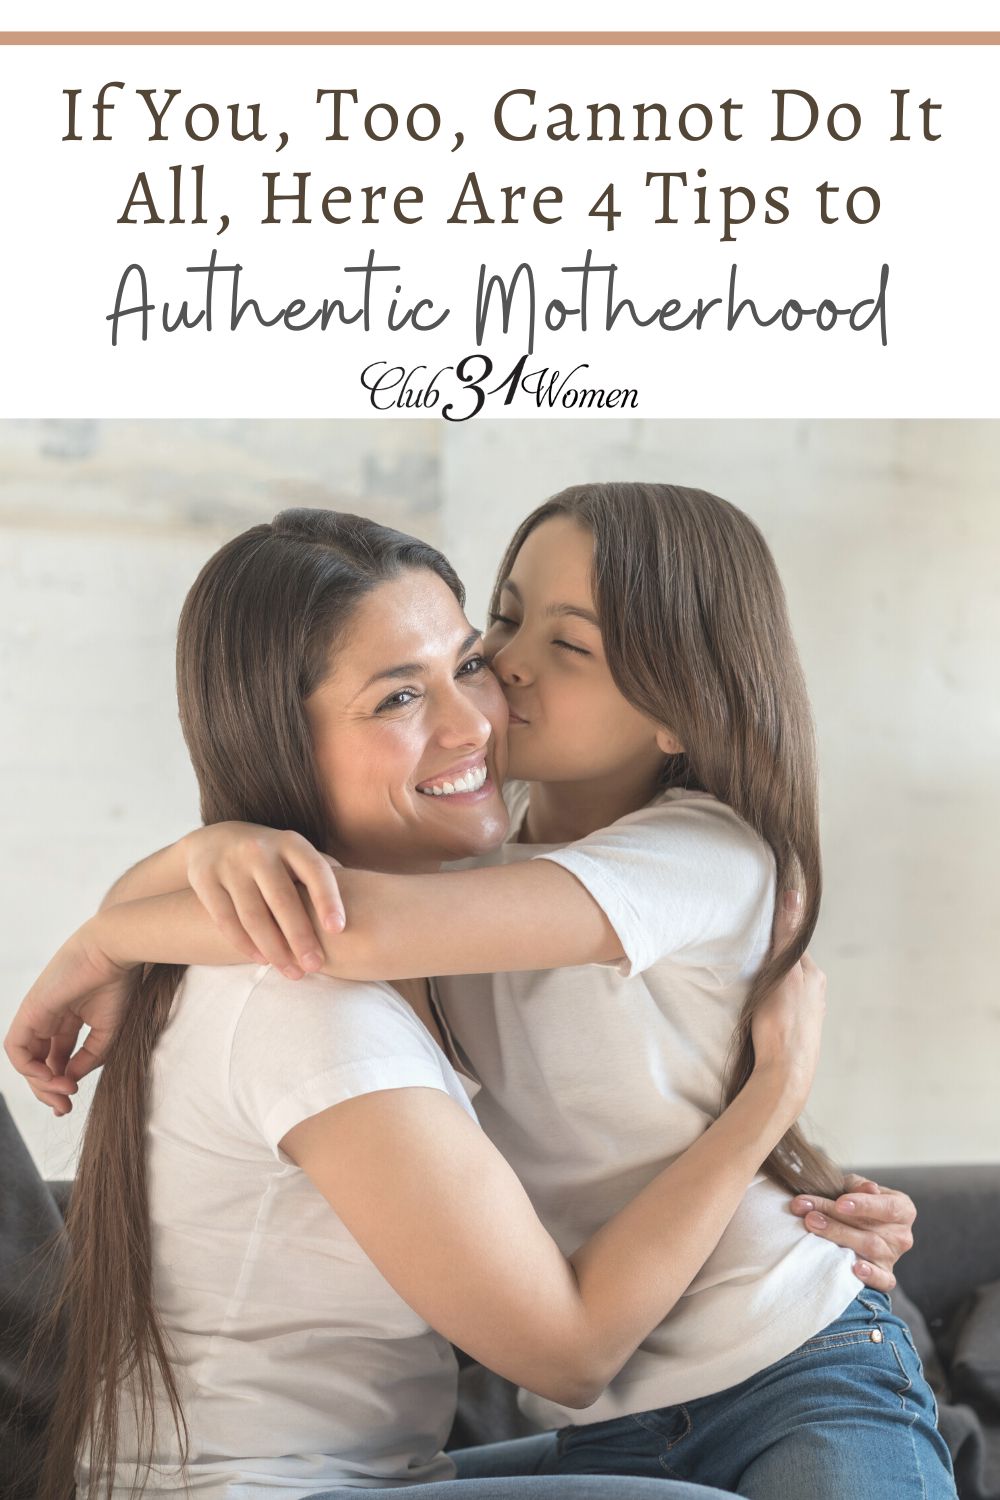 If You Too Cannot Do It All, Here Are 4 Tips To Authentic Motherhood via @Club31Women